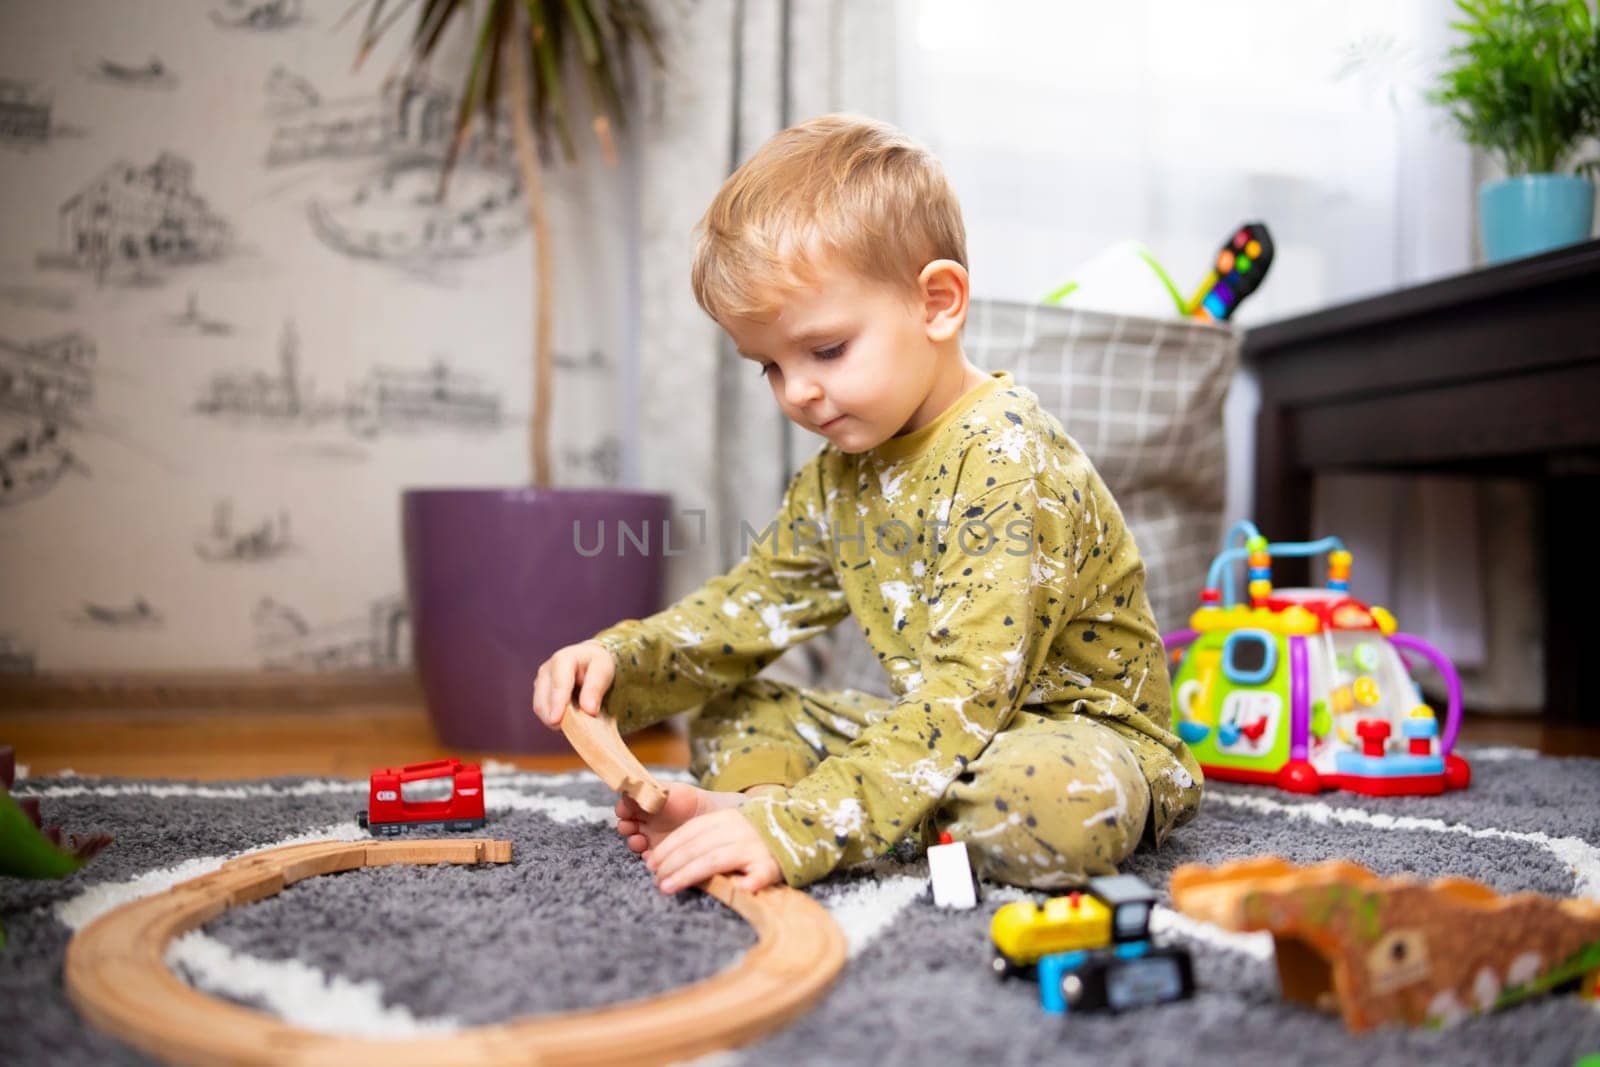 Baby playing with toy railroad, trains and cars on the floor by andreyz